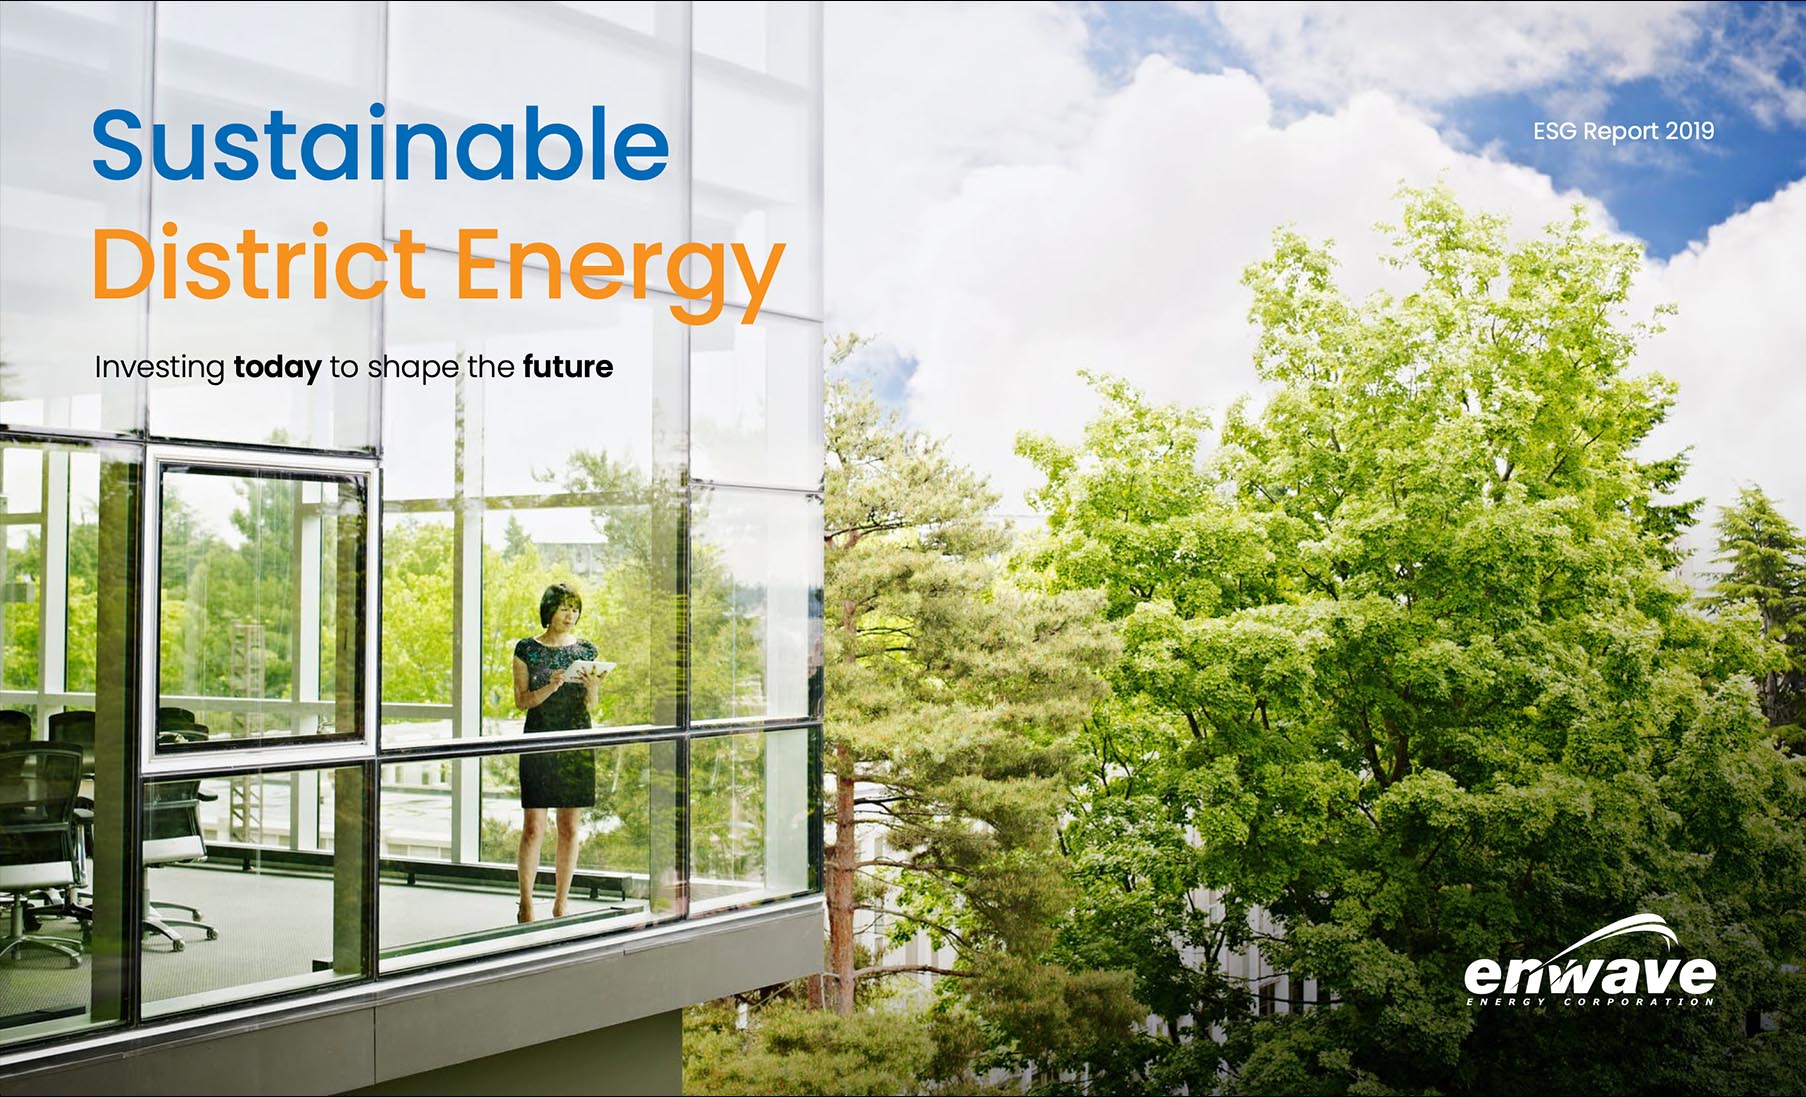 Sustainable disctrict energy: investing today to shape the future